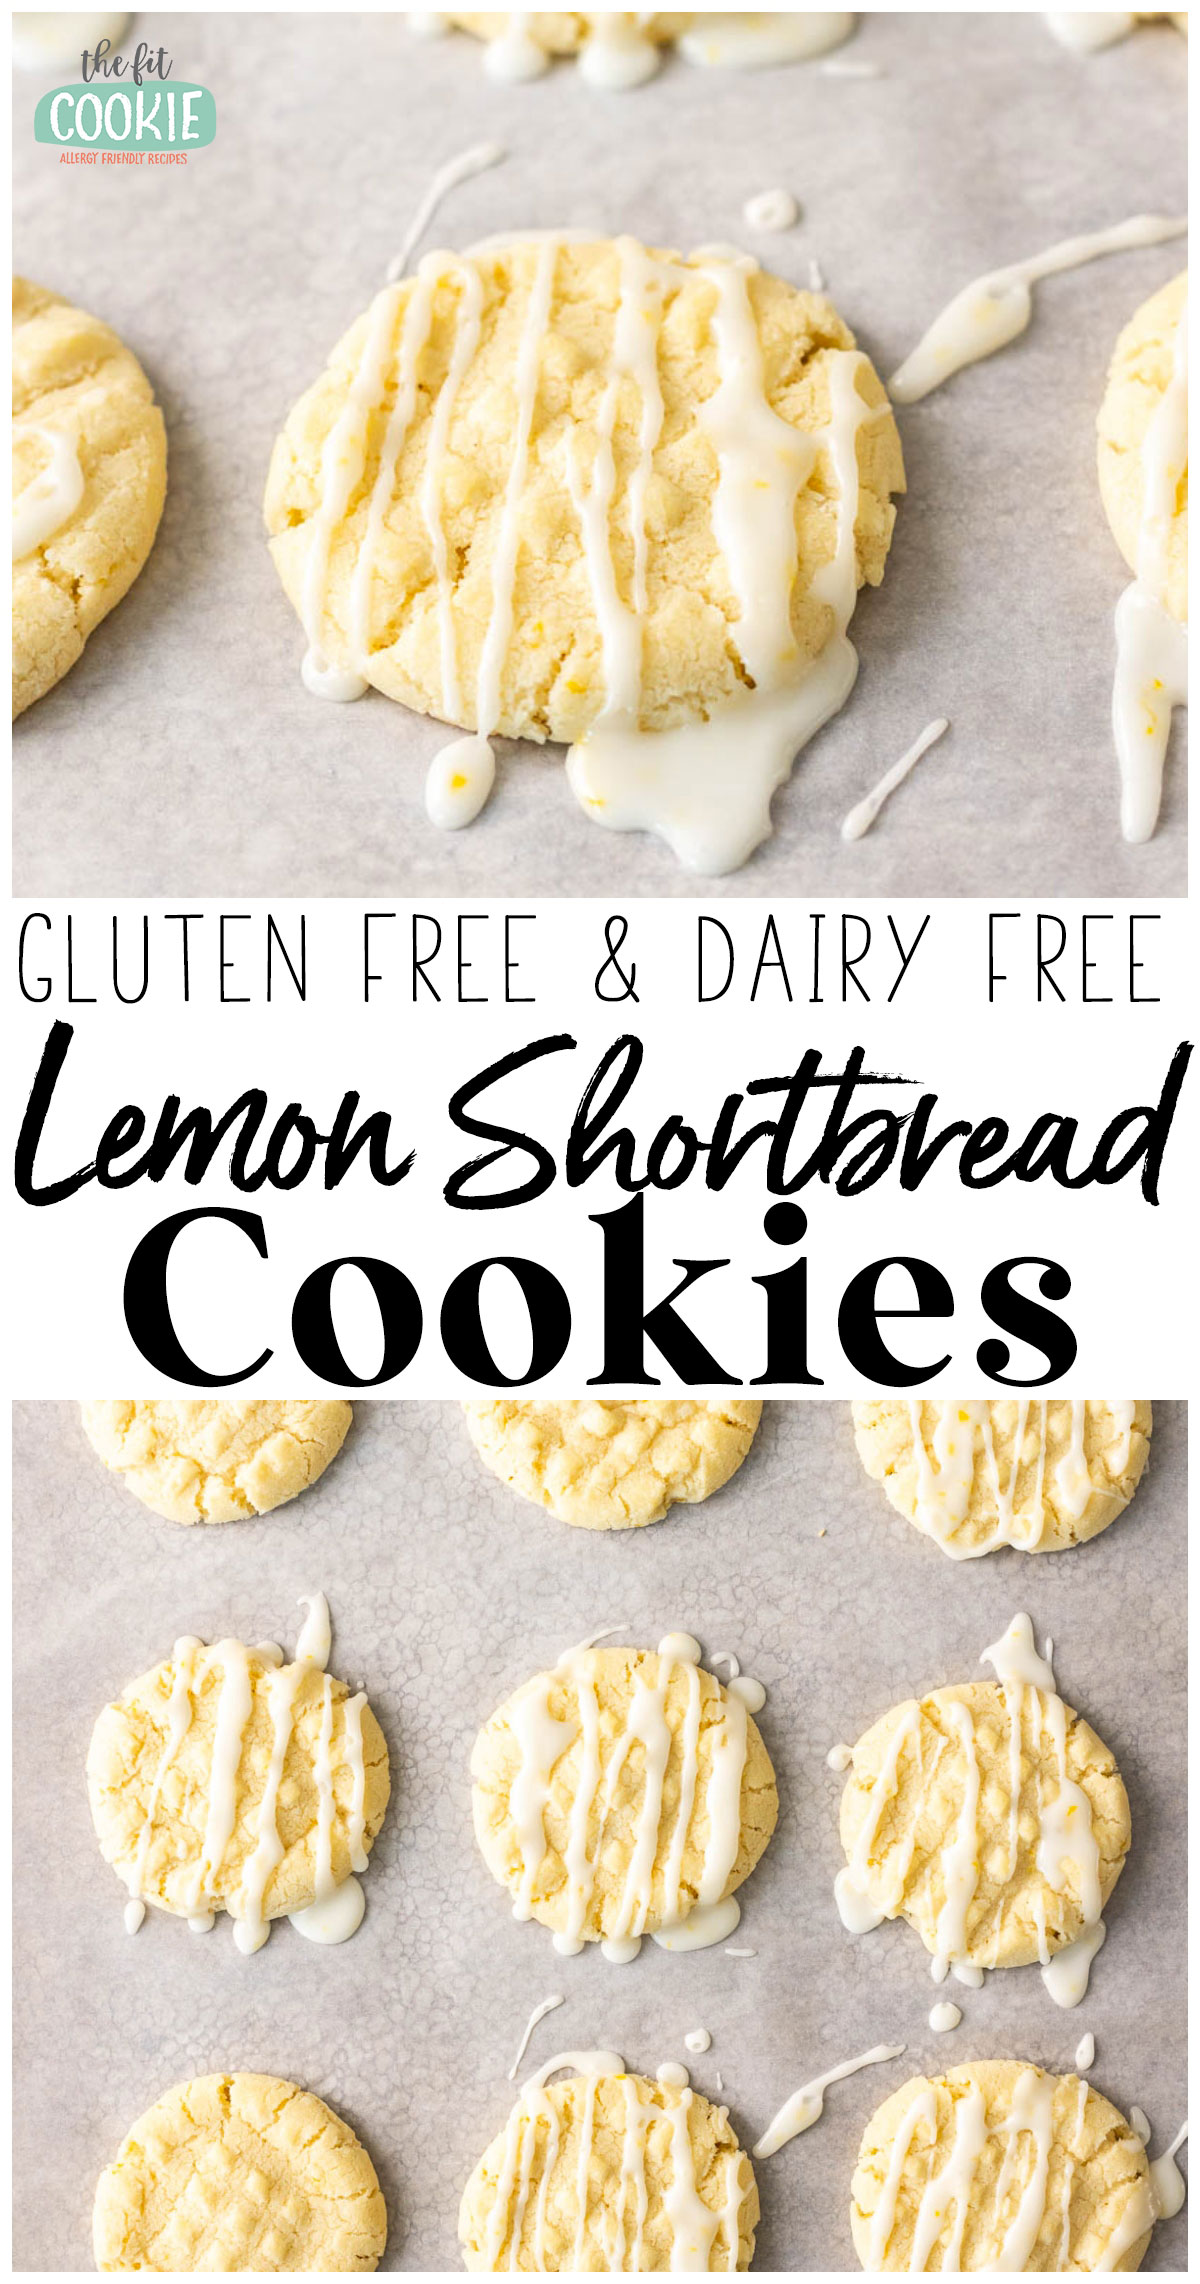 A collage of 2 photos of lemon shortbread cookies with text overlay.